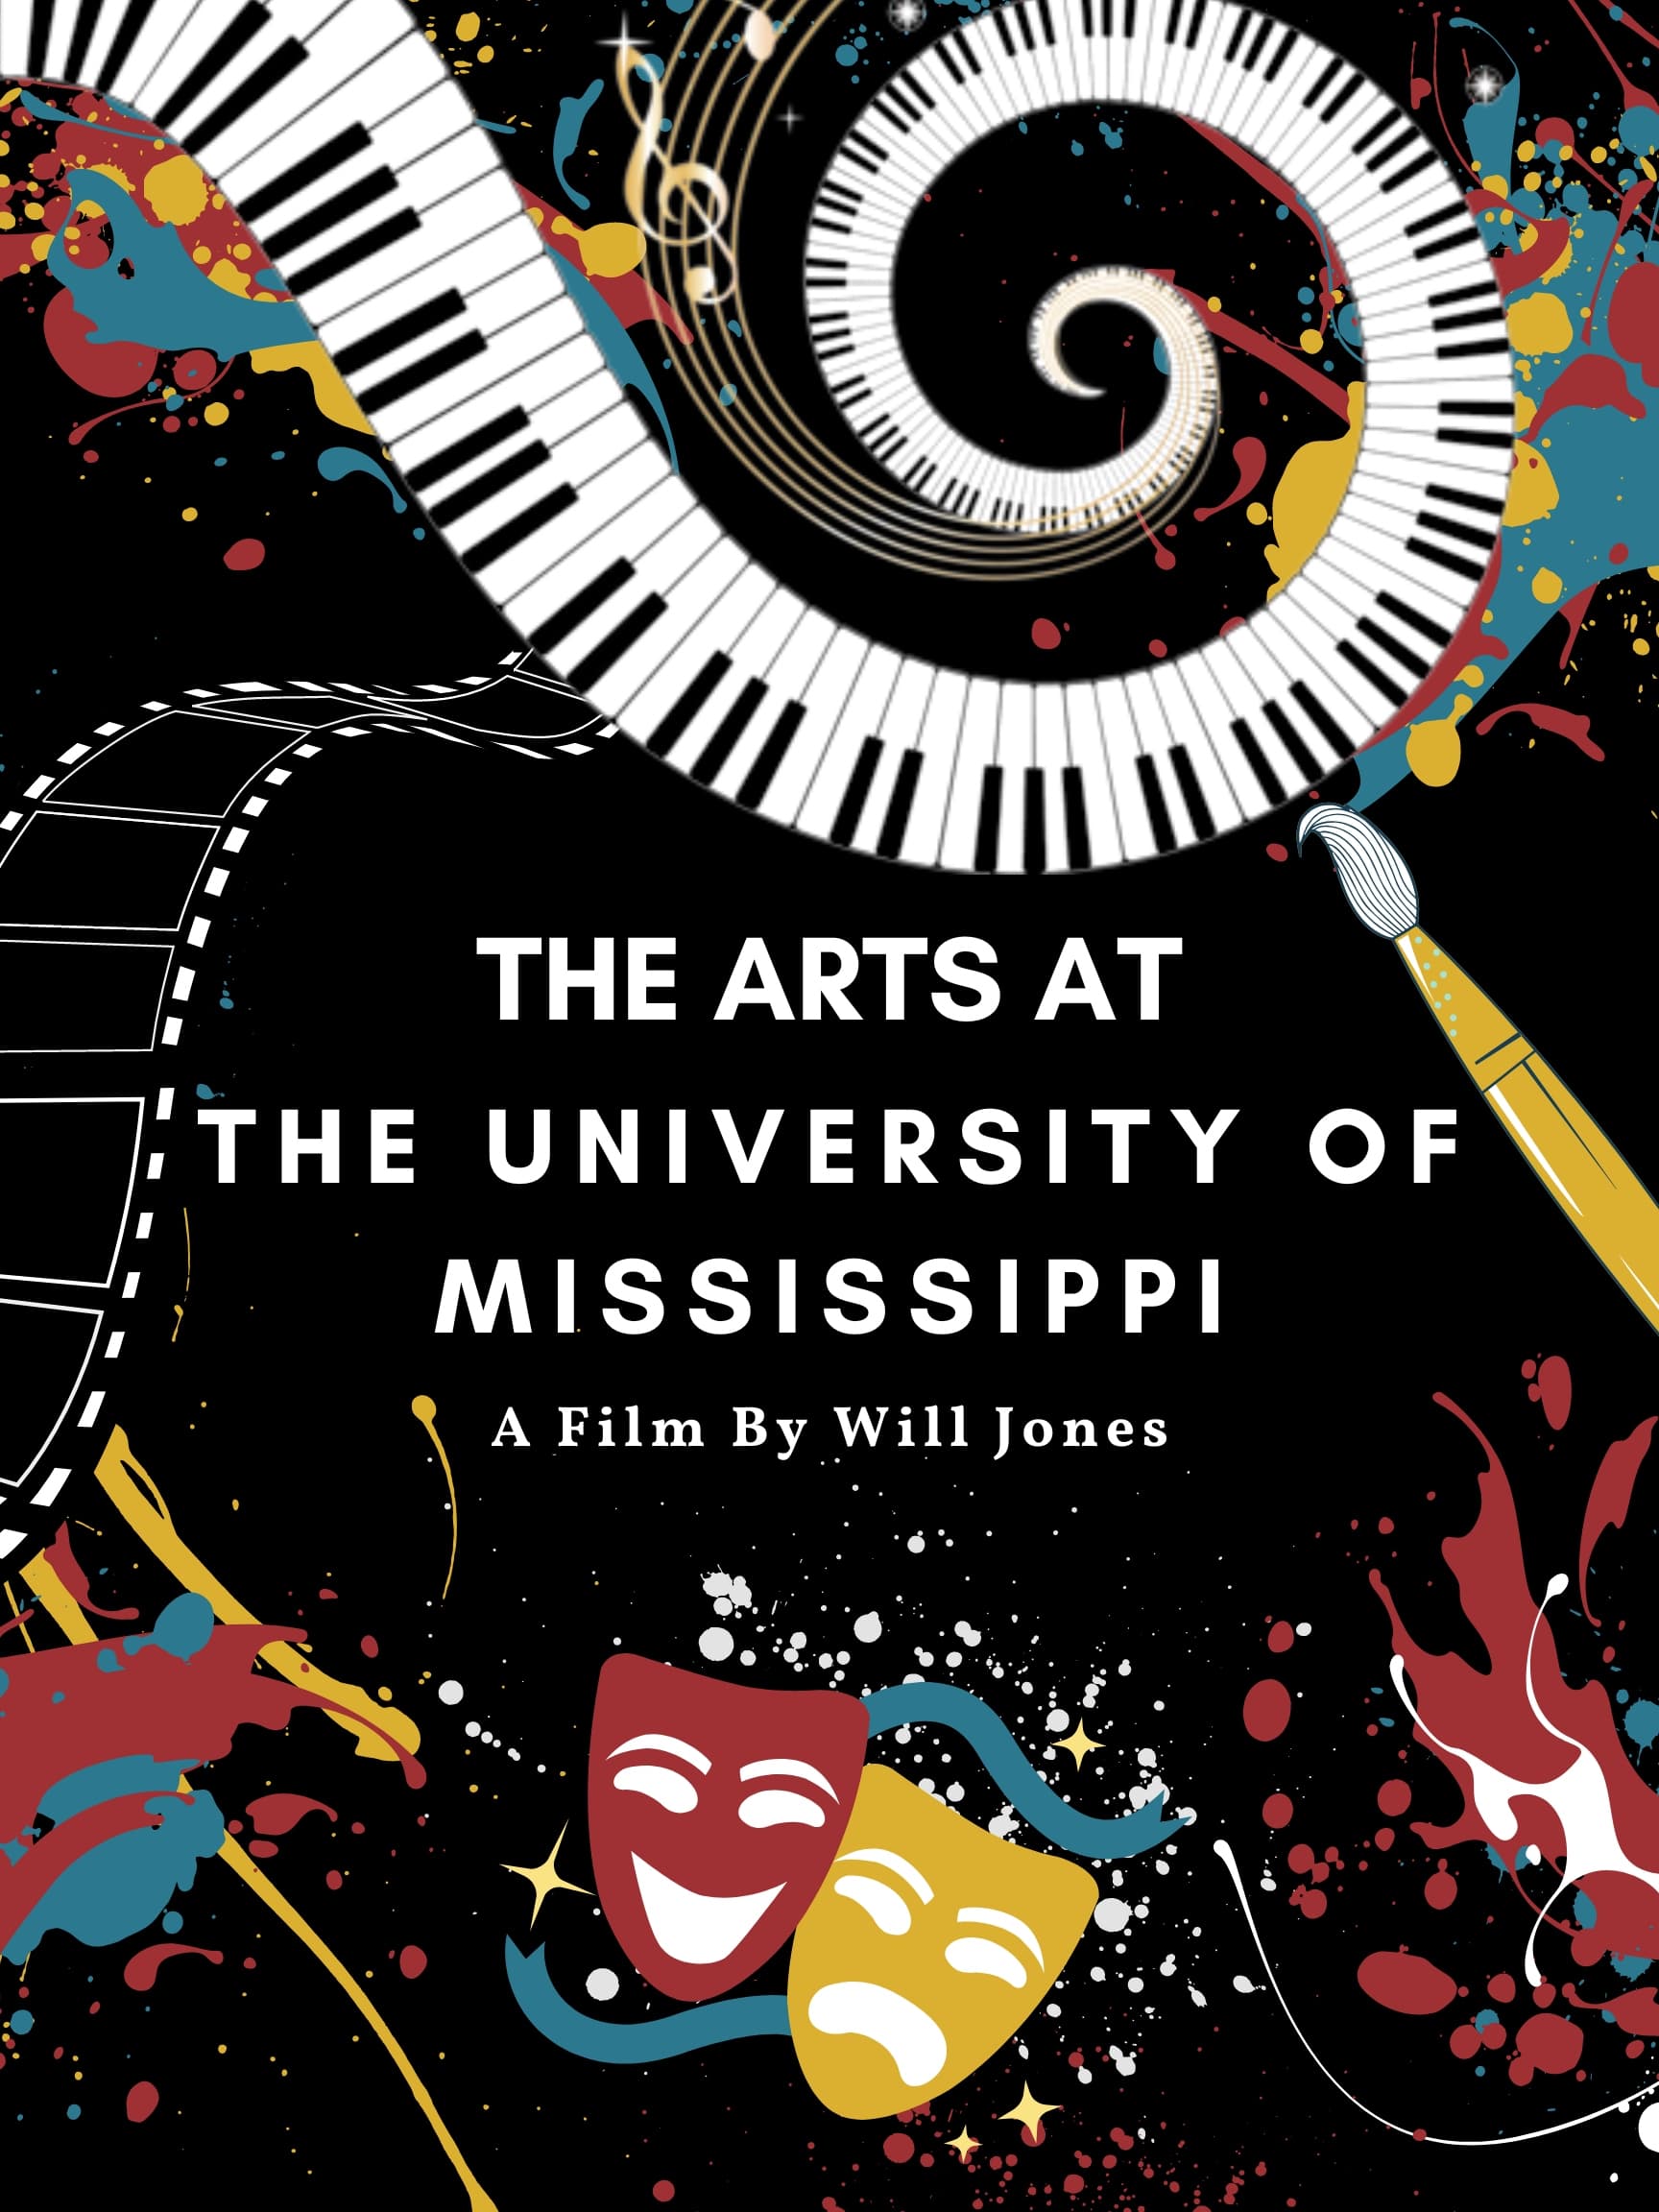 The Arts at the University of Mississippi